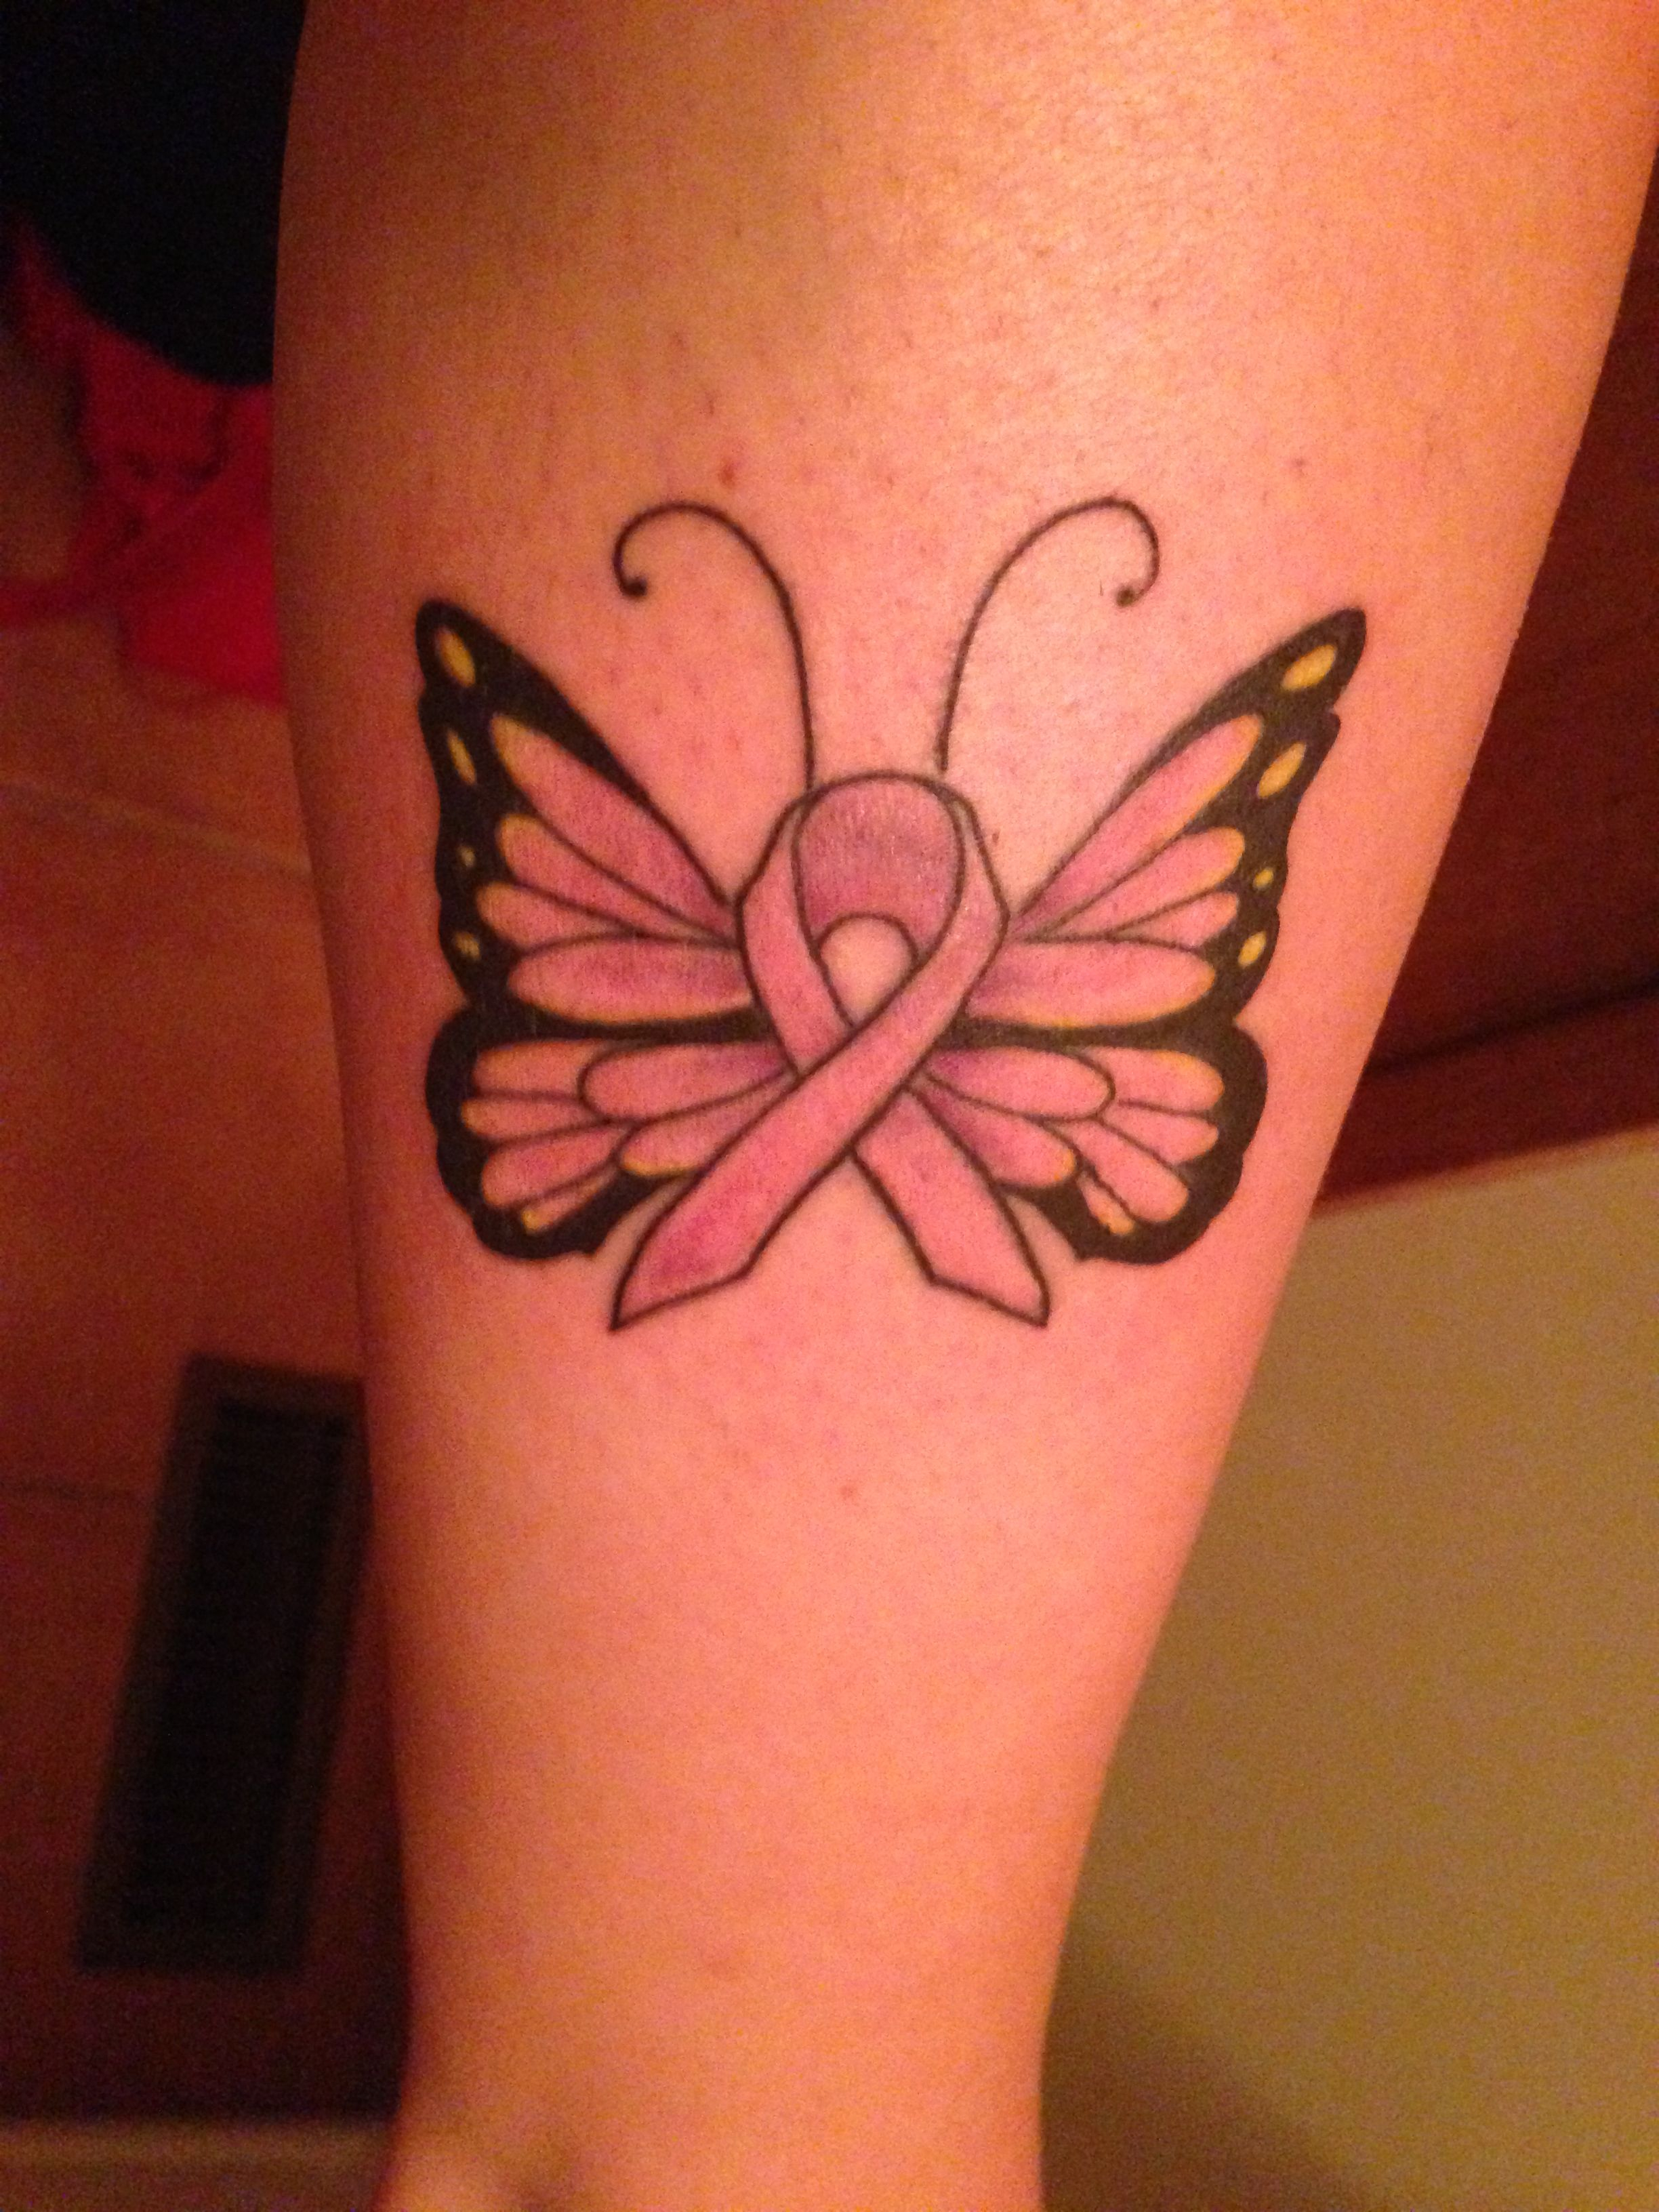 Breast Cancer Butterfly Tattoo Cute Small Tattoos Breast Cancer in dimensions 2448 X 3264